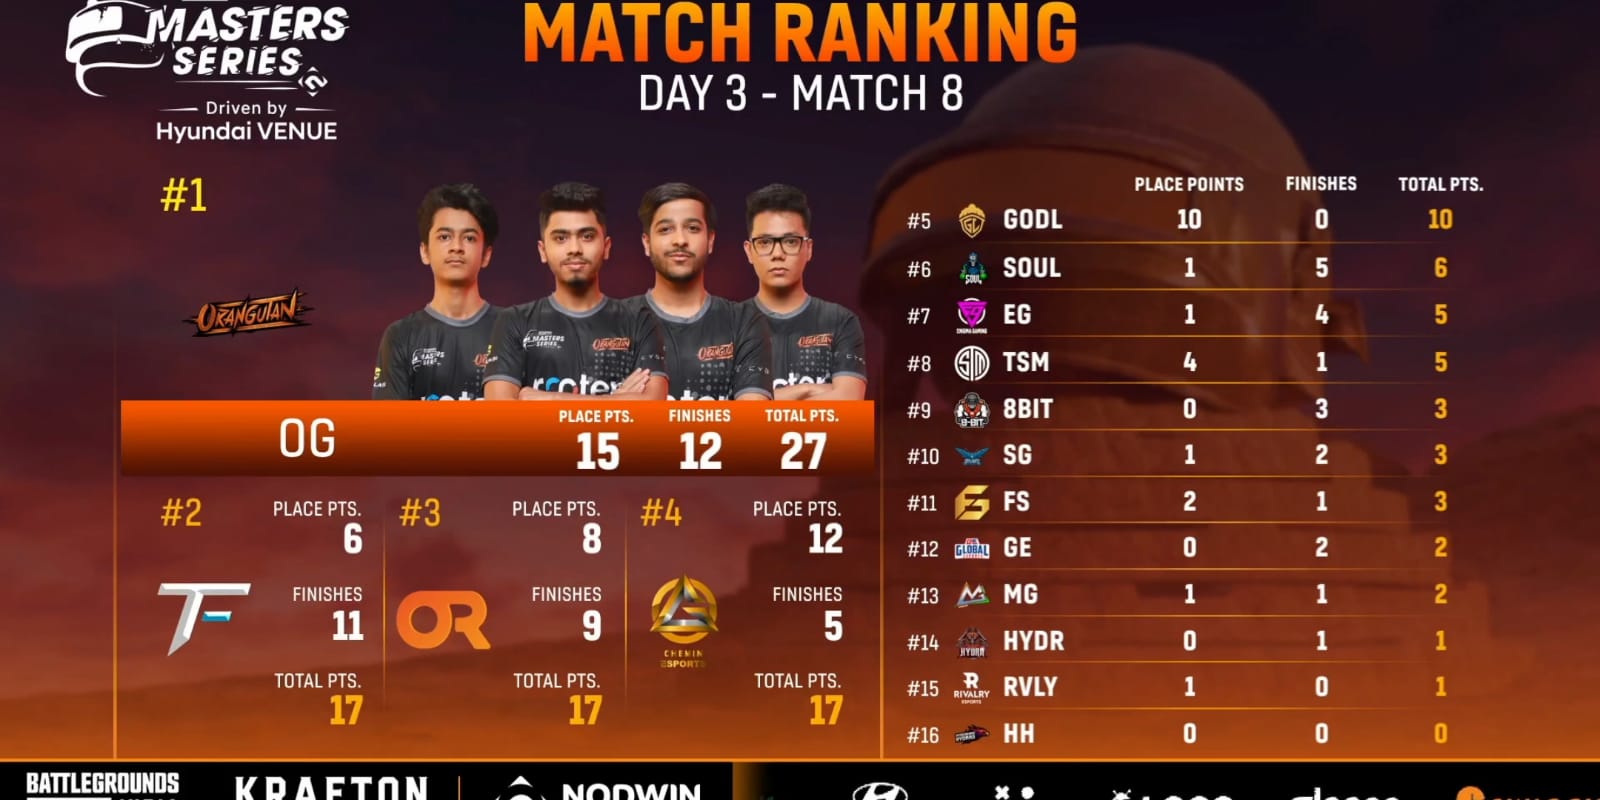 Check out the BGMS Week 2 Qualifiers Day 3 Highlights where Team Orangutan tops the chart with 100 points, More Details on BGMI Masters series.